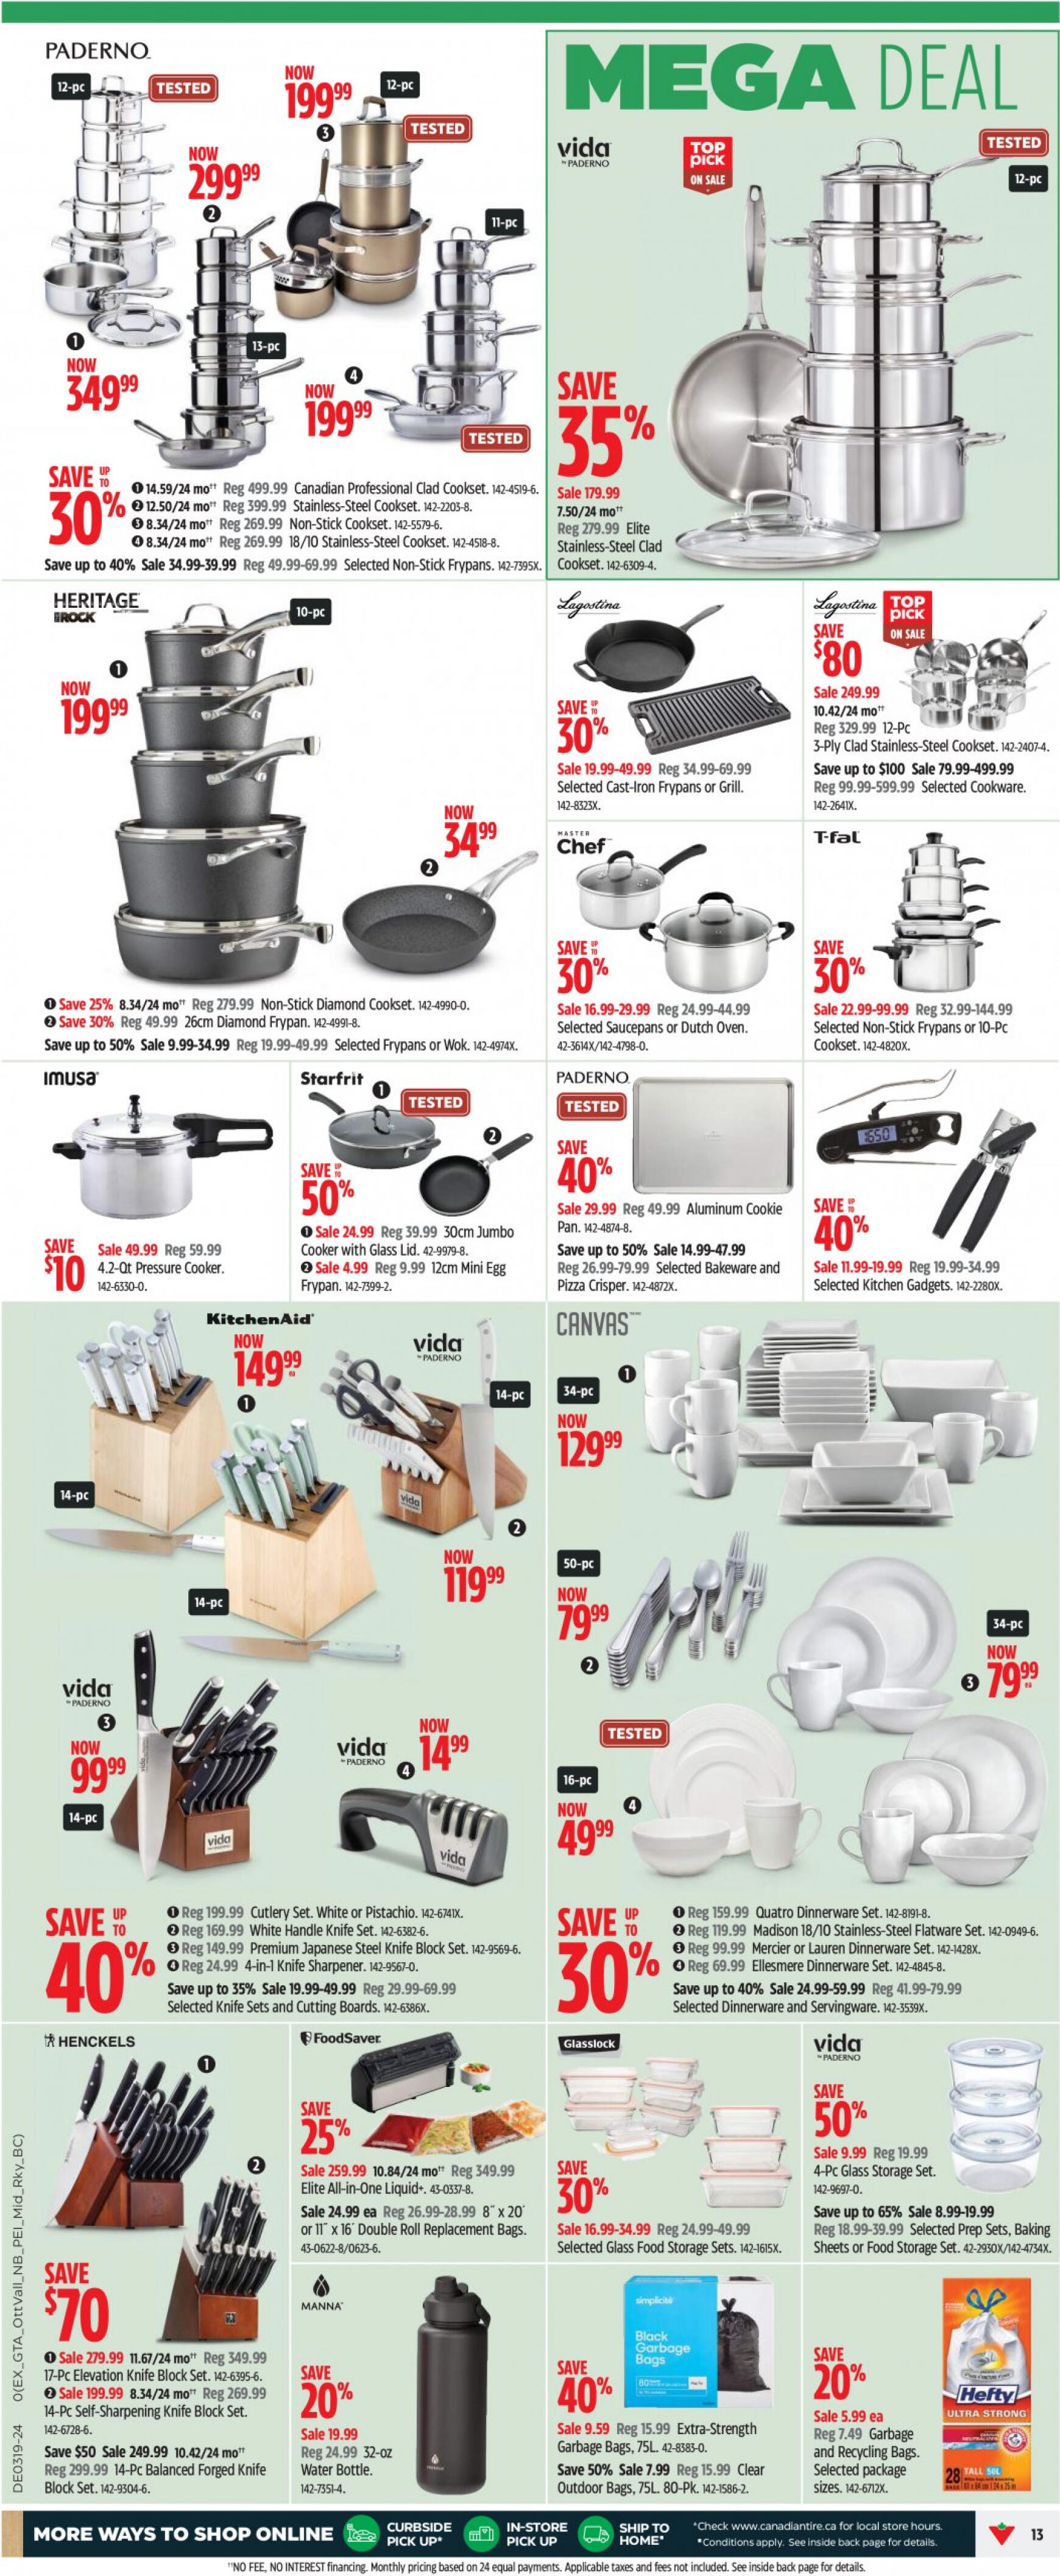 canadian-tire - Canadian Tire flyer current 02.05. - 08.05. - page: 12